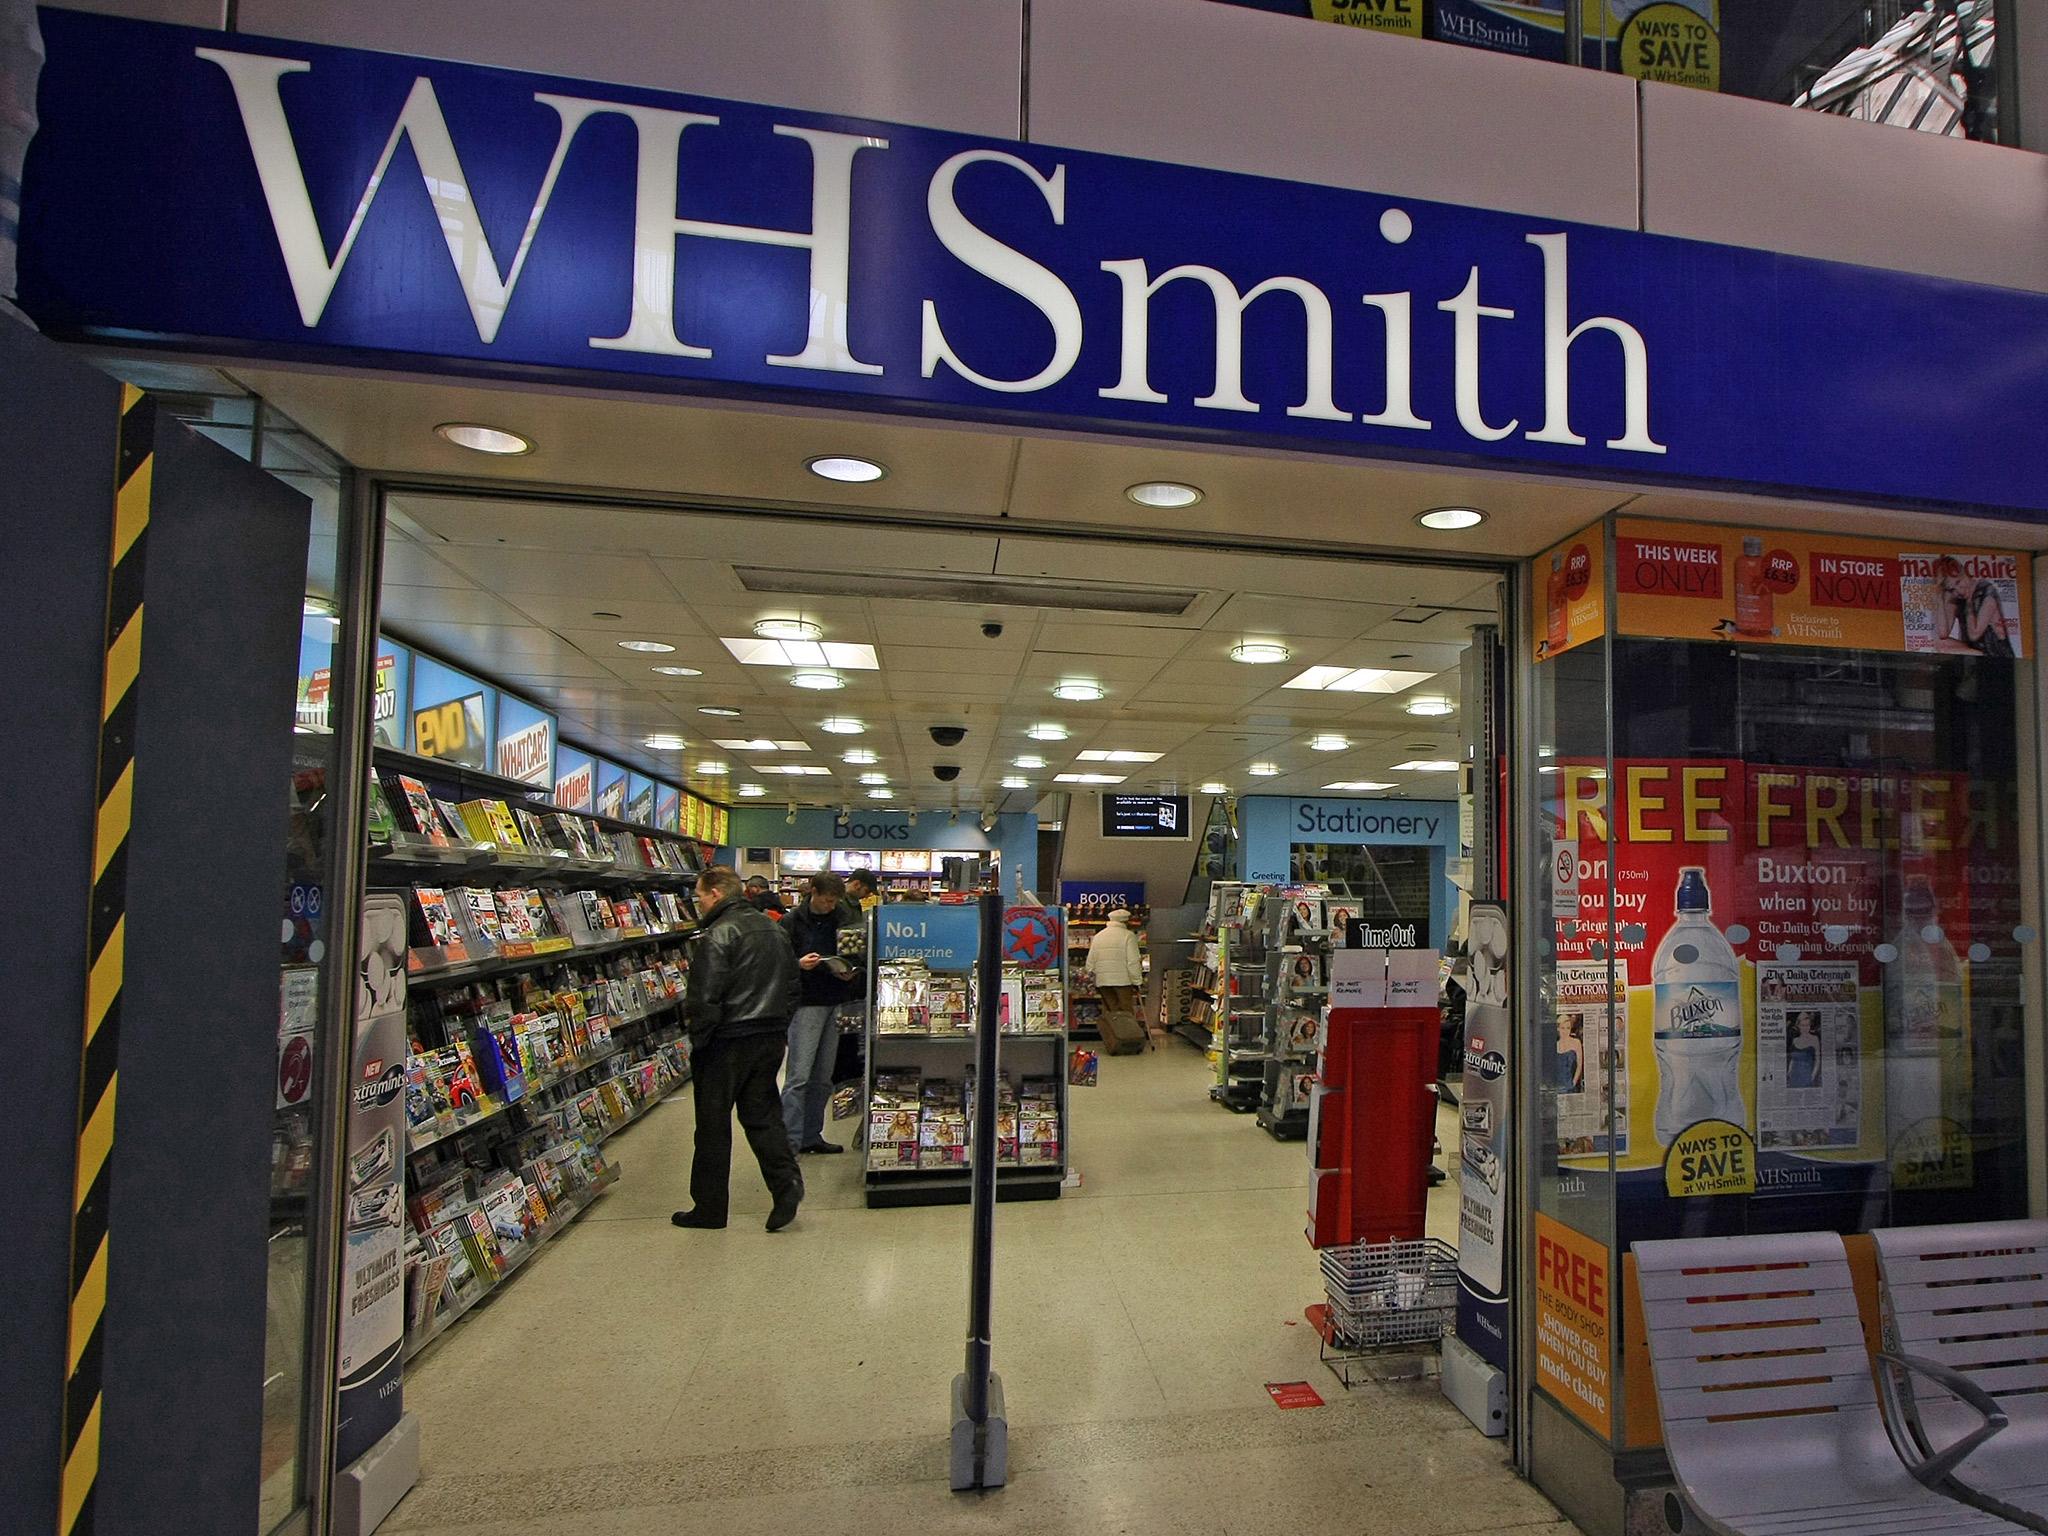 WH Smith has been in business for 225 years